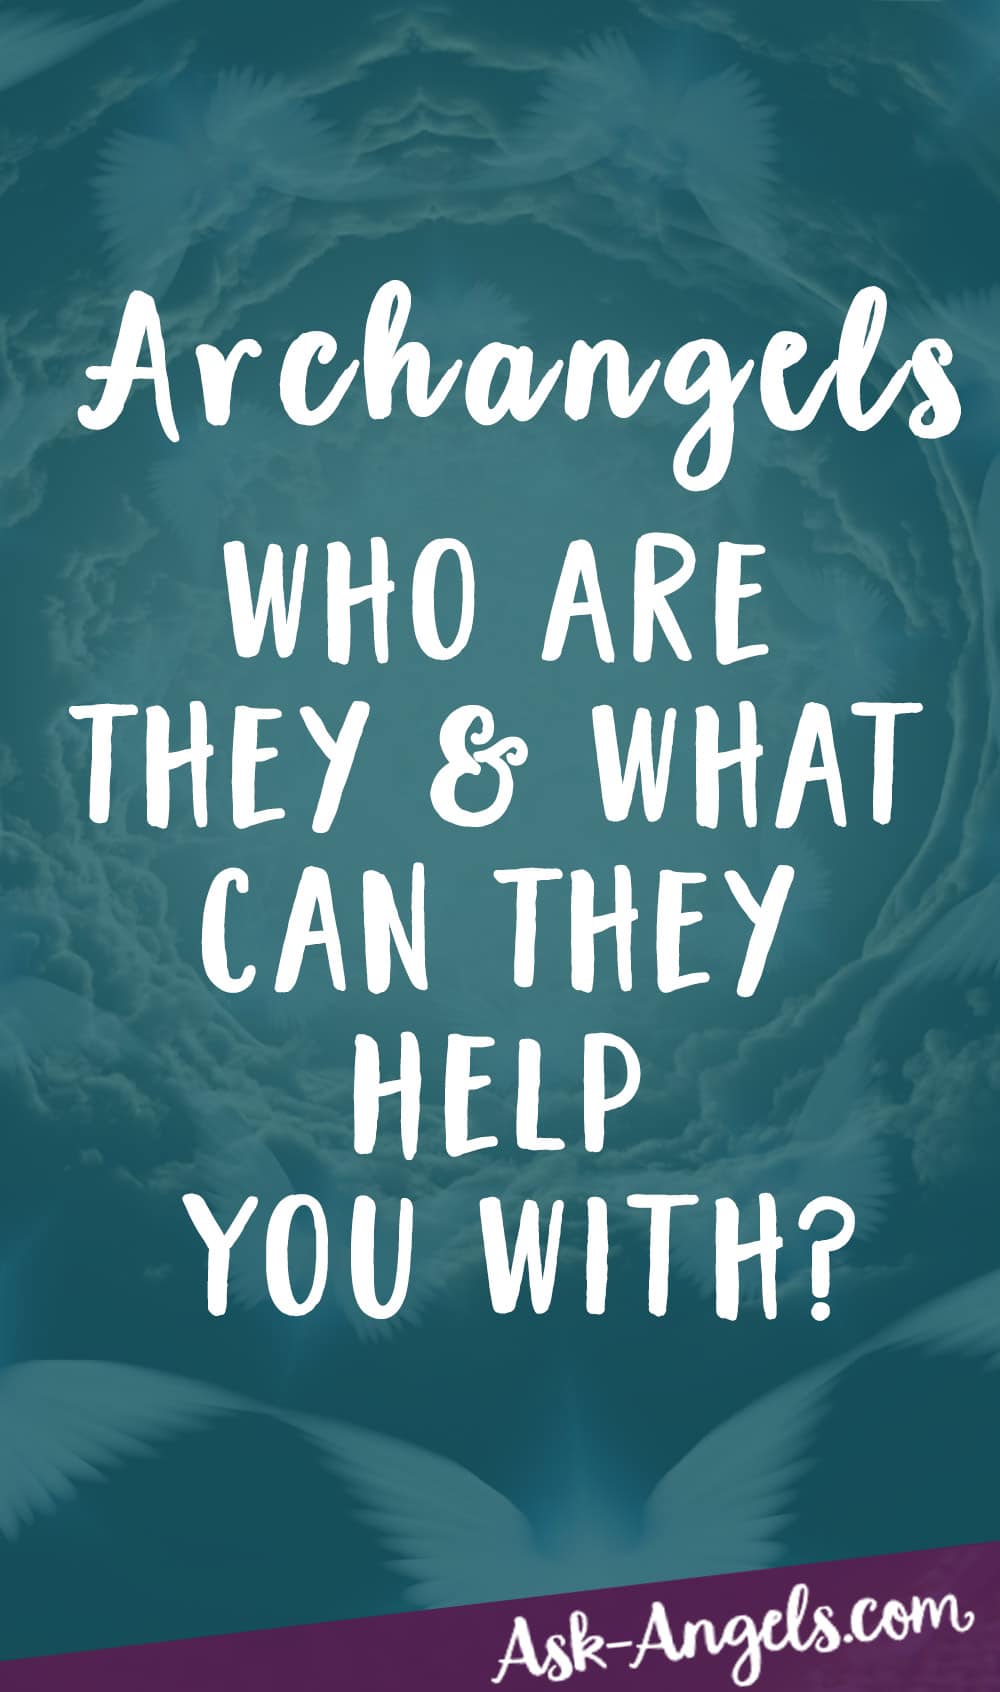 The Archangels - Who Are They?